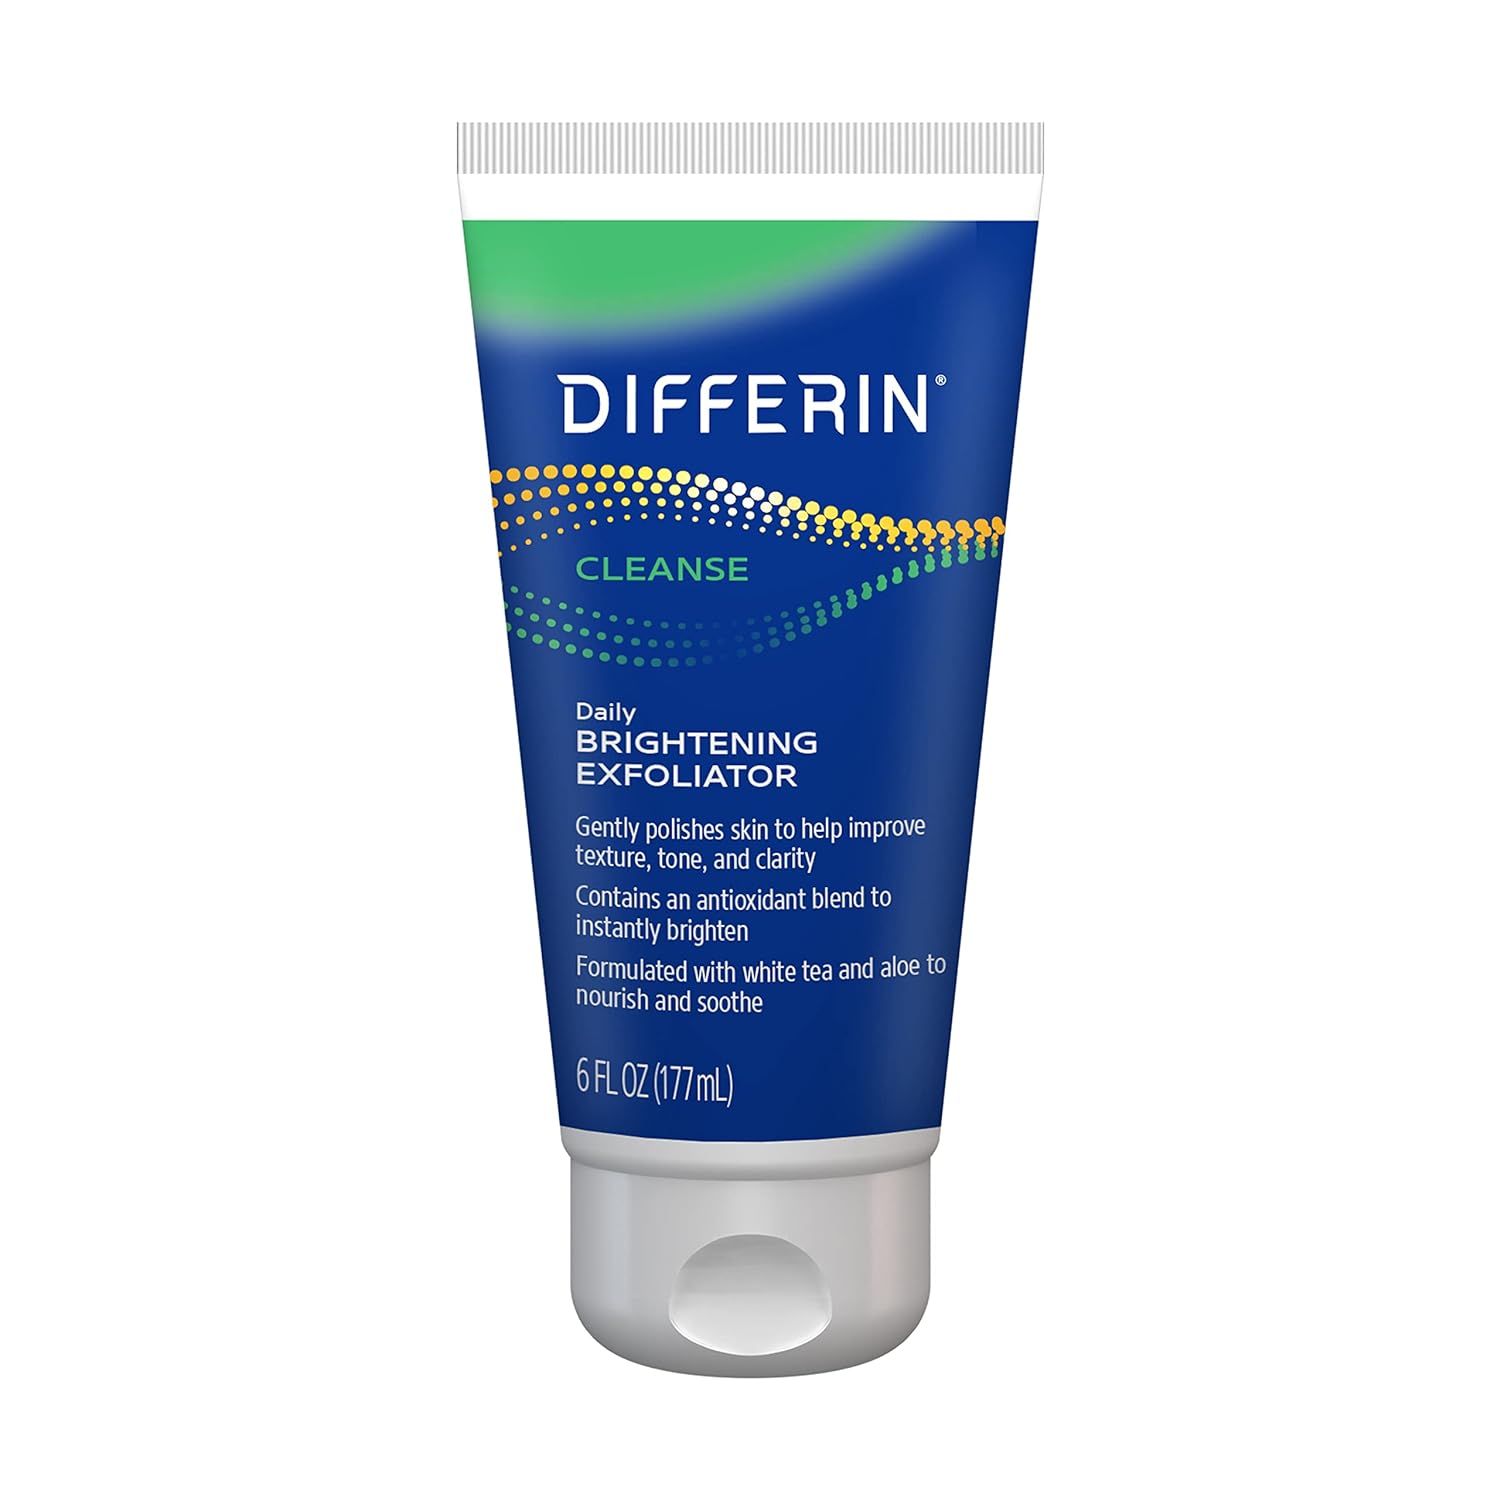 Differin Face Scrub Daily Brightening Exfoliator, Improves Tone and Texture for Acne Prone Skin, Green, 6   (Packaging May Vary)